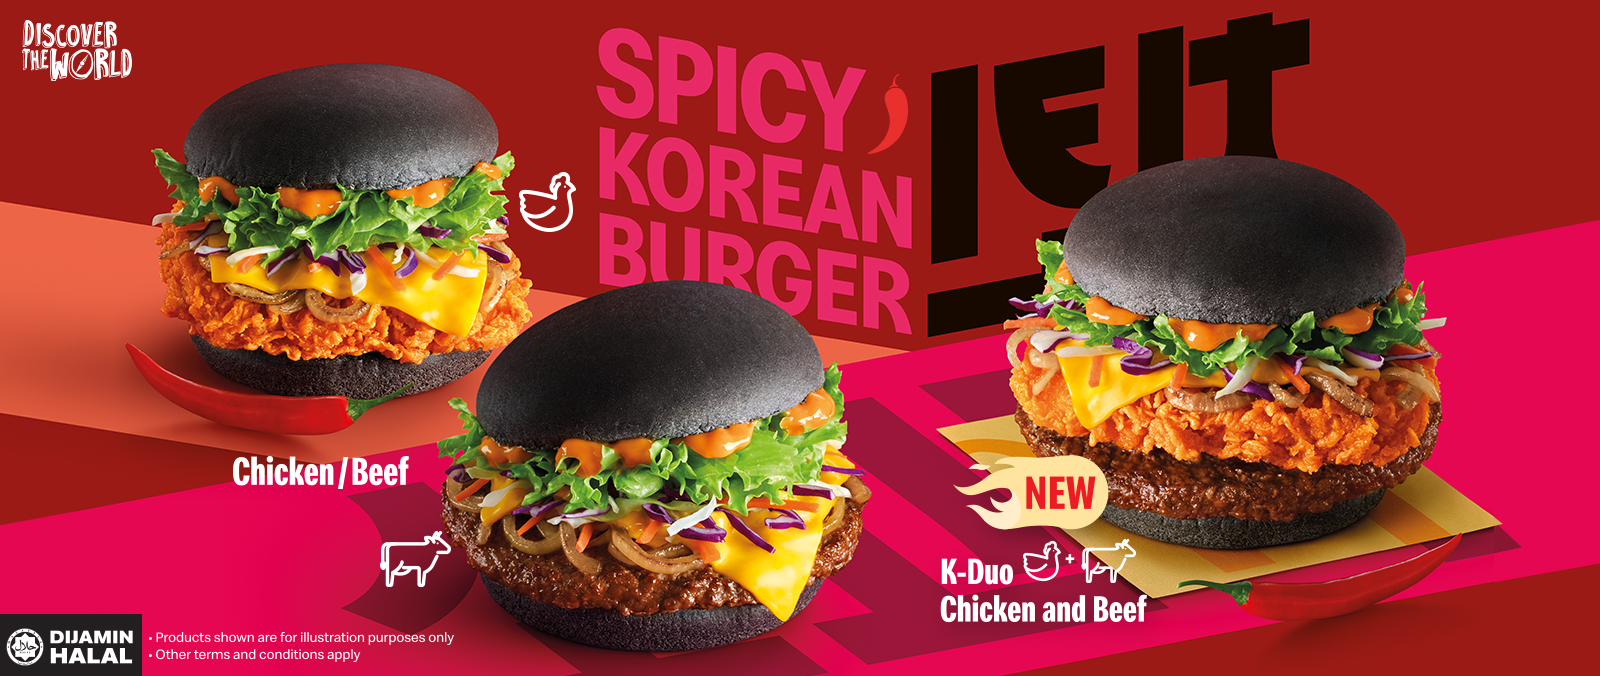 McD’s Korean burgers are here to take the stage!'s image'